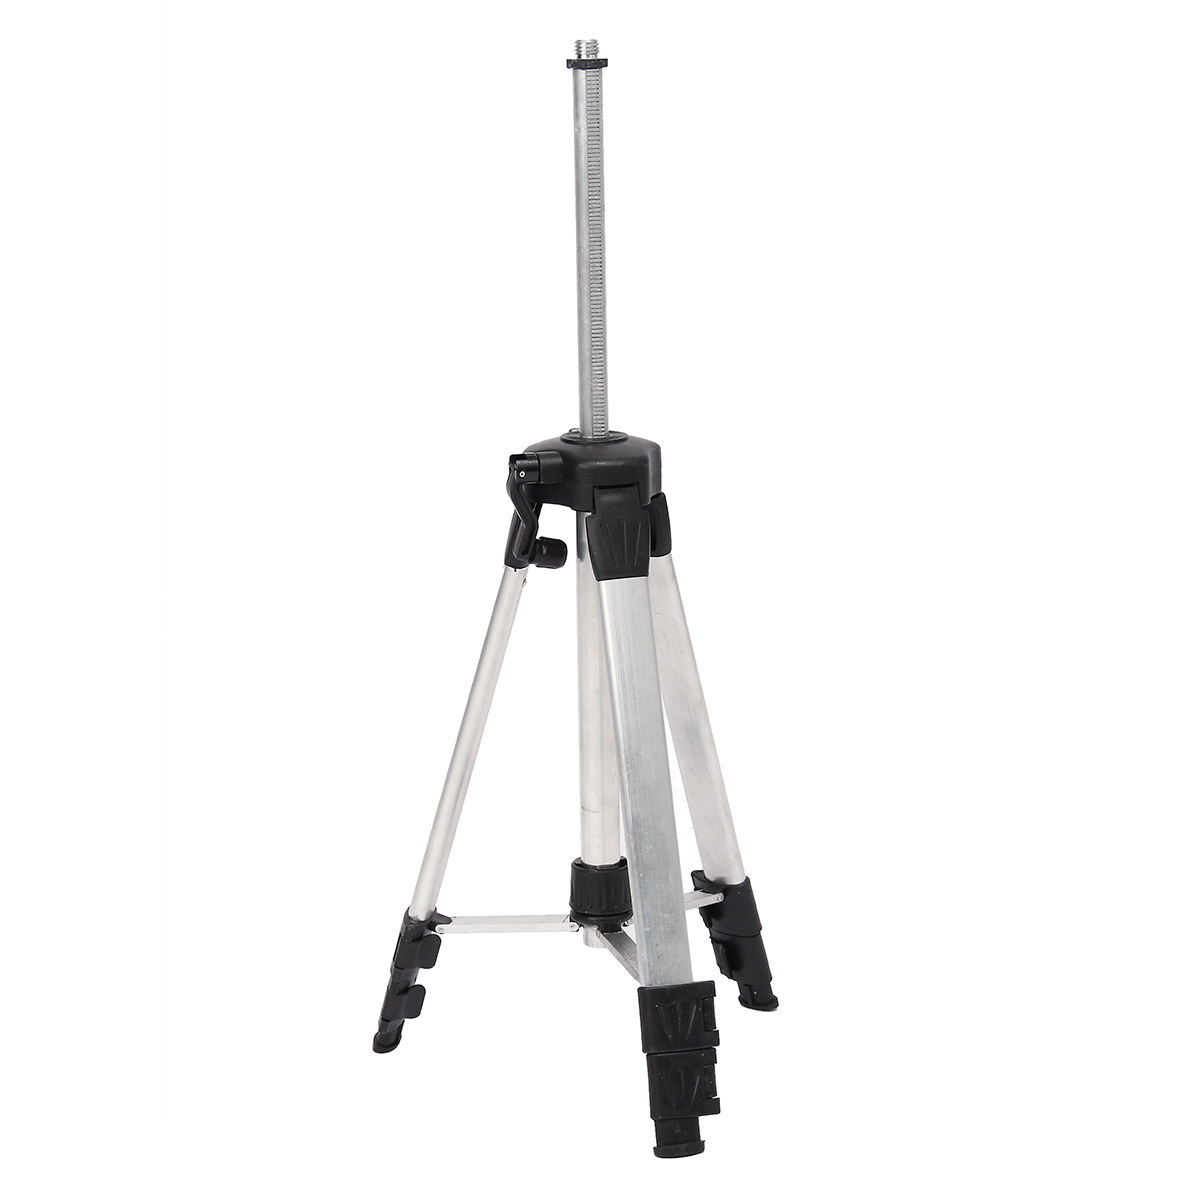 12M-Tripod-Level-Stand-for-Automatic-Self-Leveling-Laser-Level-Measurement-Tool-1131120-2